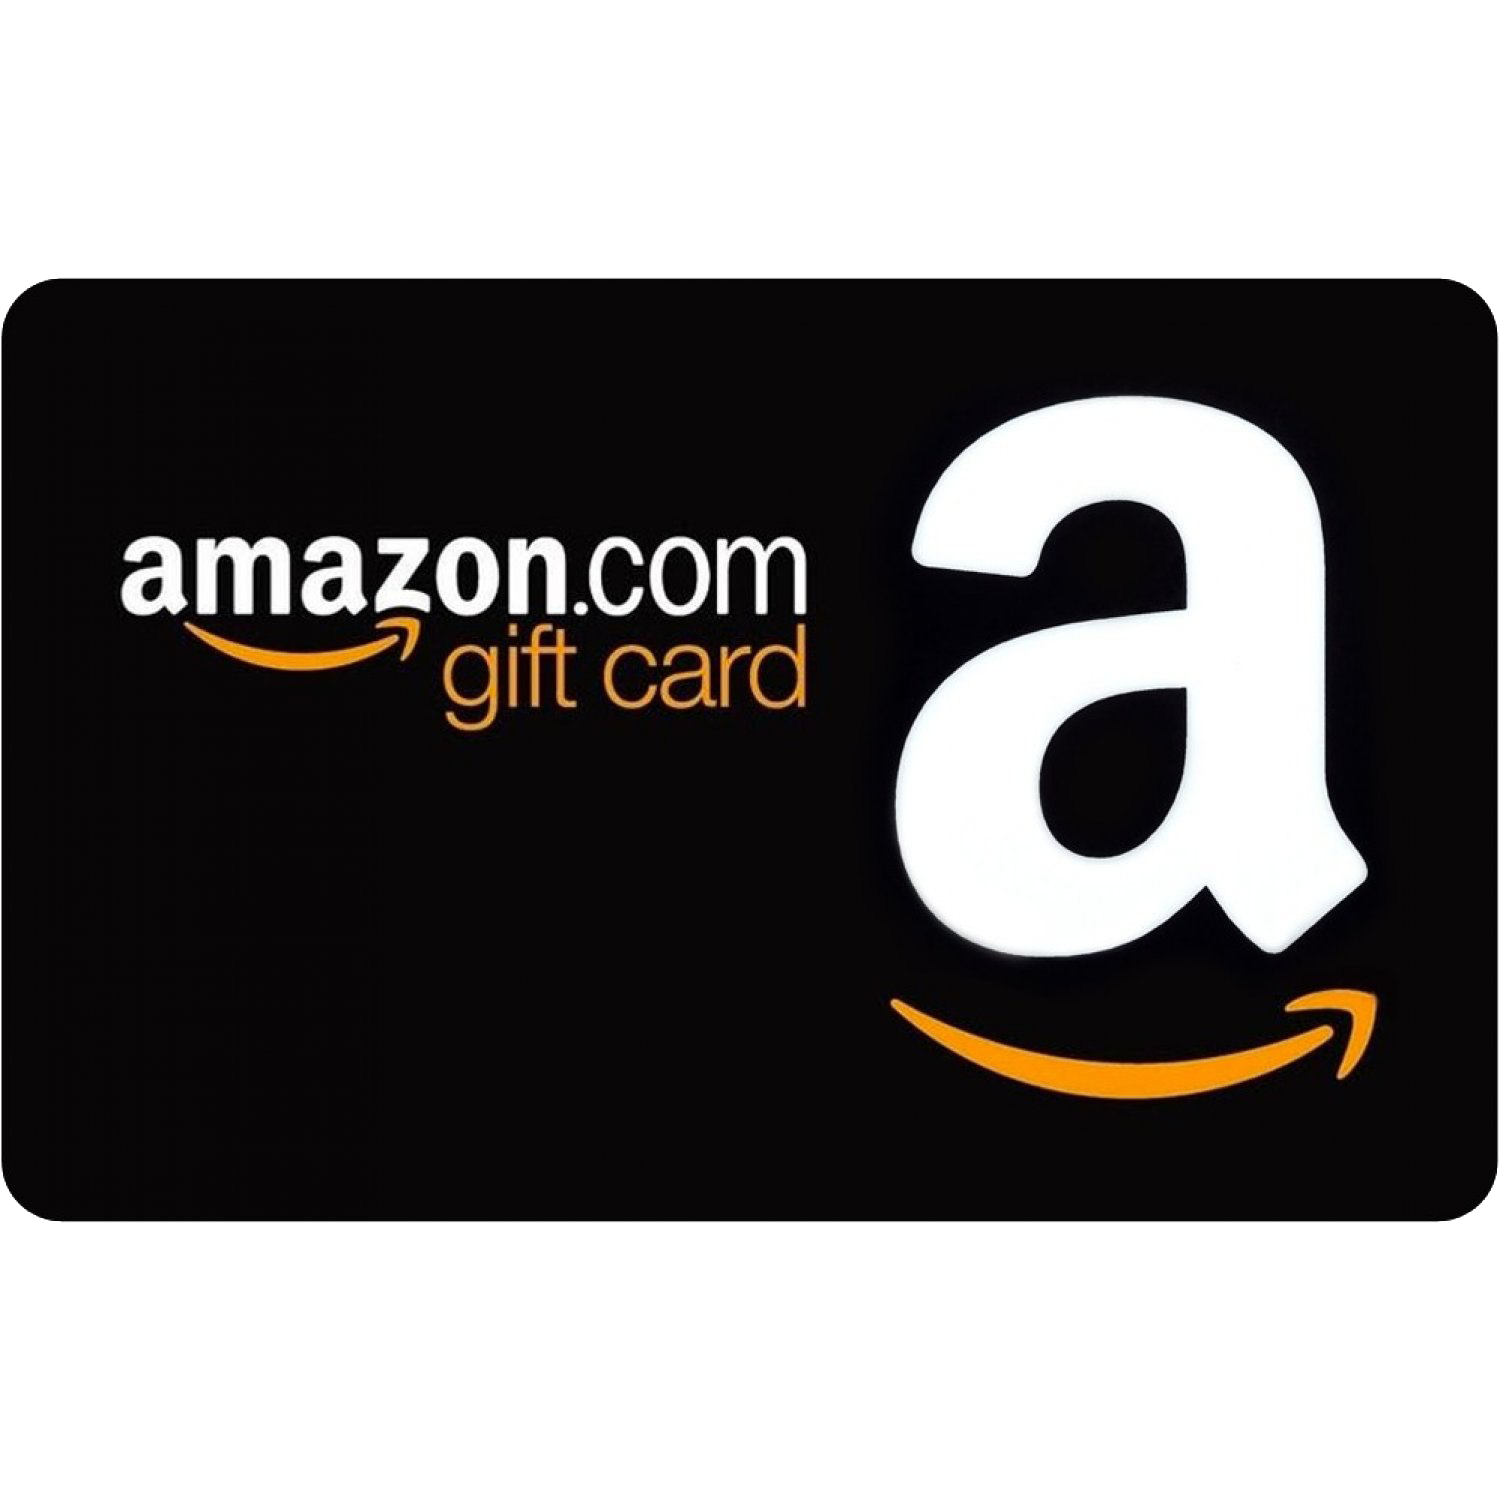 A gift card from amazon.com